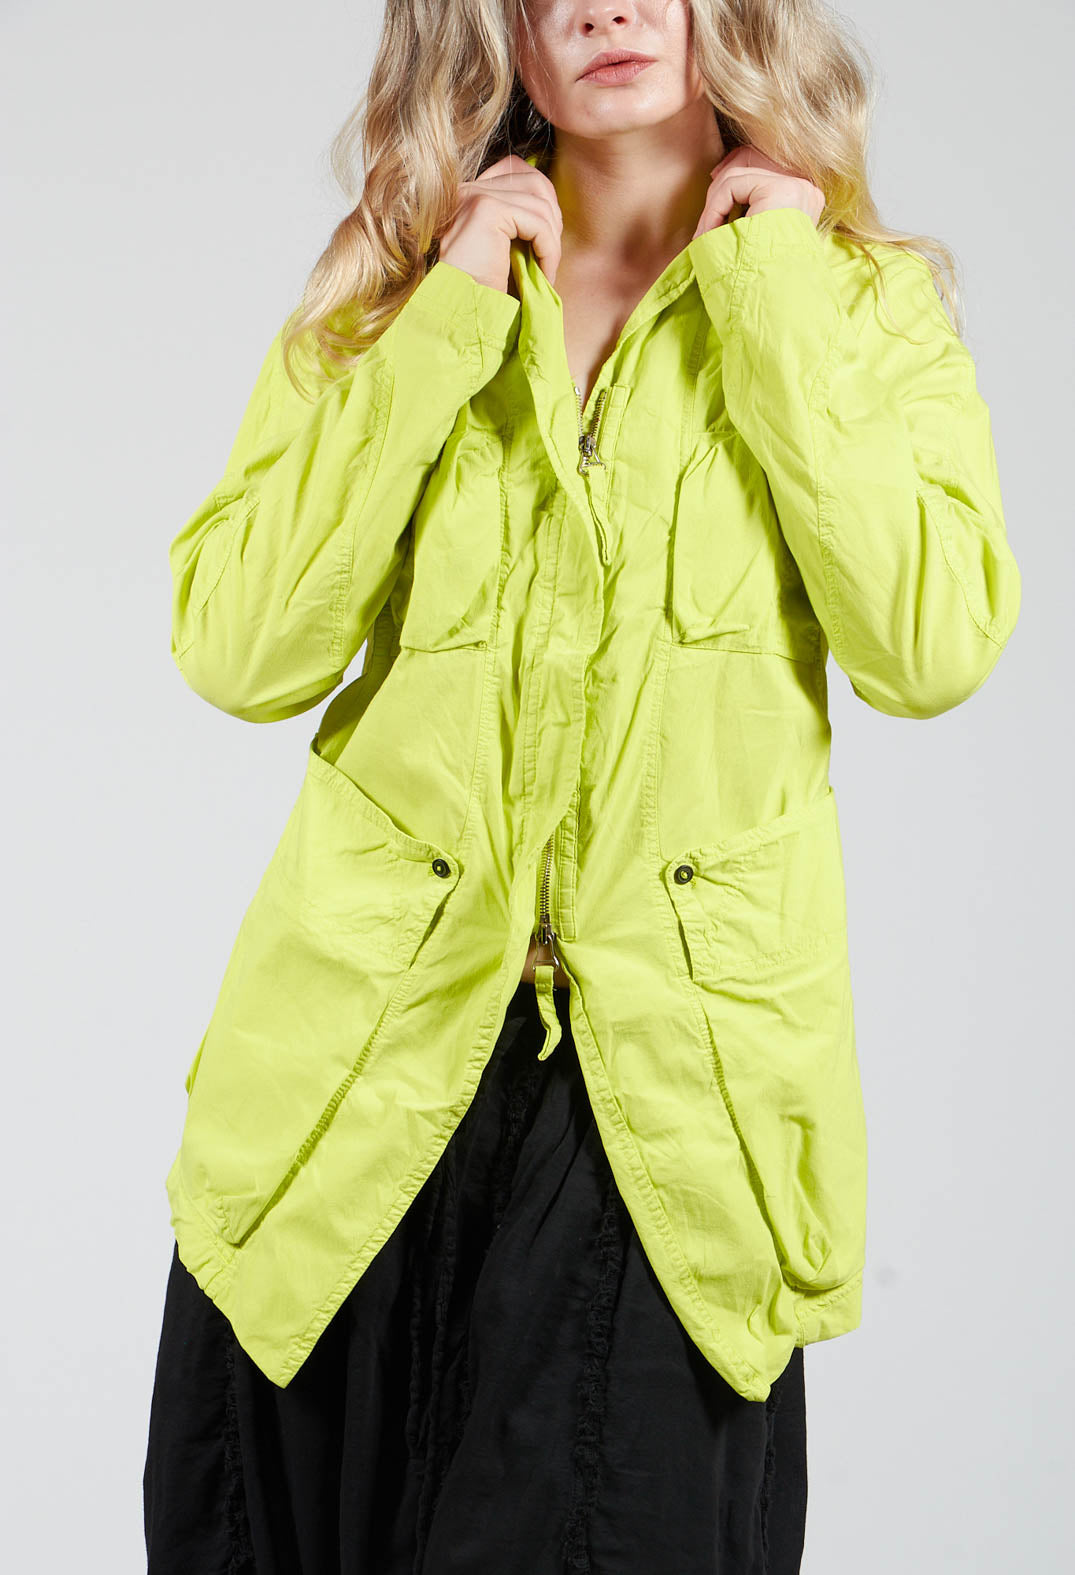 Jacket with Featured Pockets in Spring